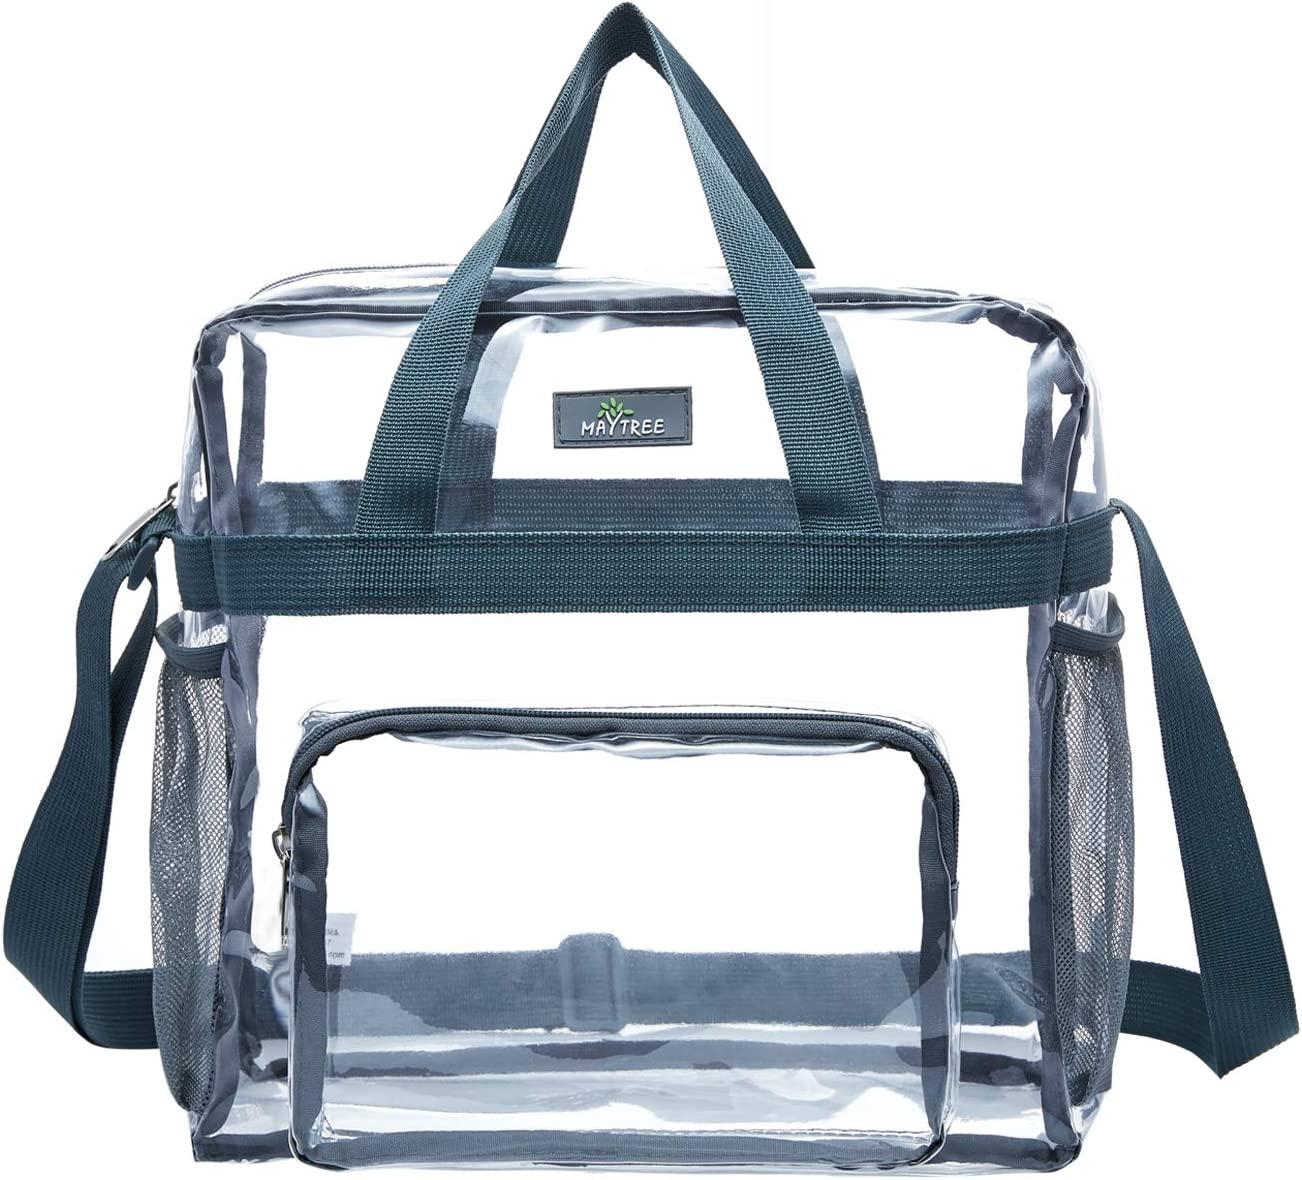  Ginogento Stadium Approved Clear Bags for Women,Clear Purse  Stadium Approved,PVC Clear Bag,Clear Concert Bag for  Concerts,Festivals,Sports Events,Work : Sports & Outdoors